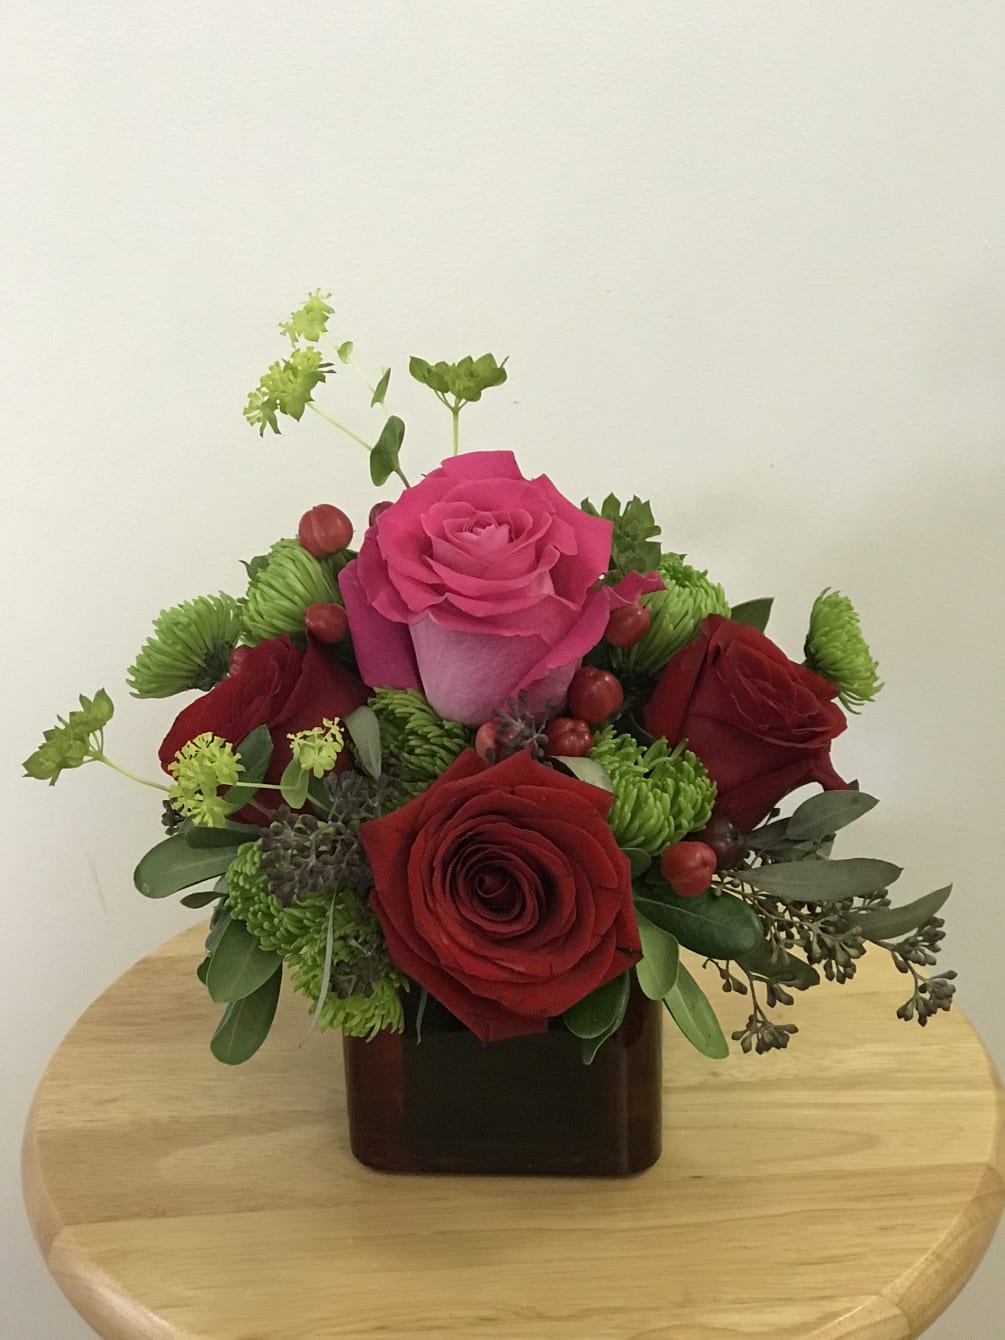 Mixed of red and hot pink roses, green button and bupleurum flowers